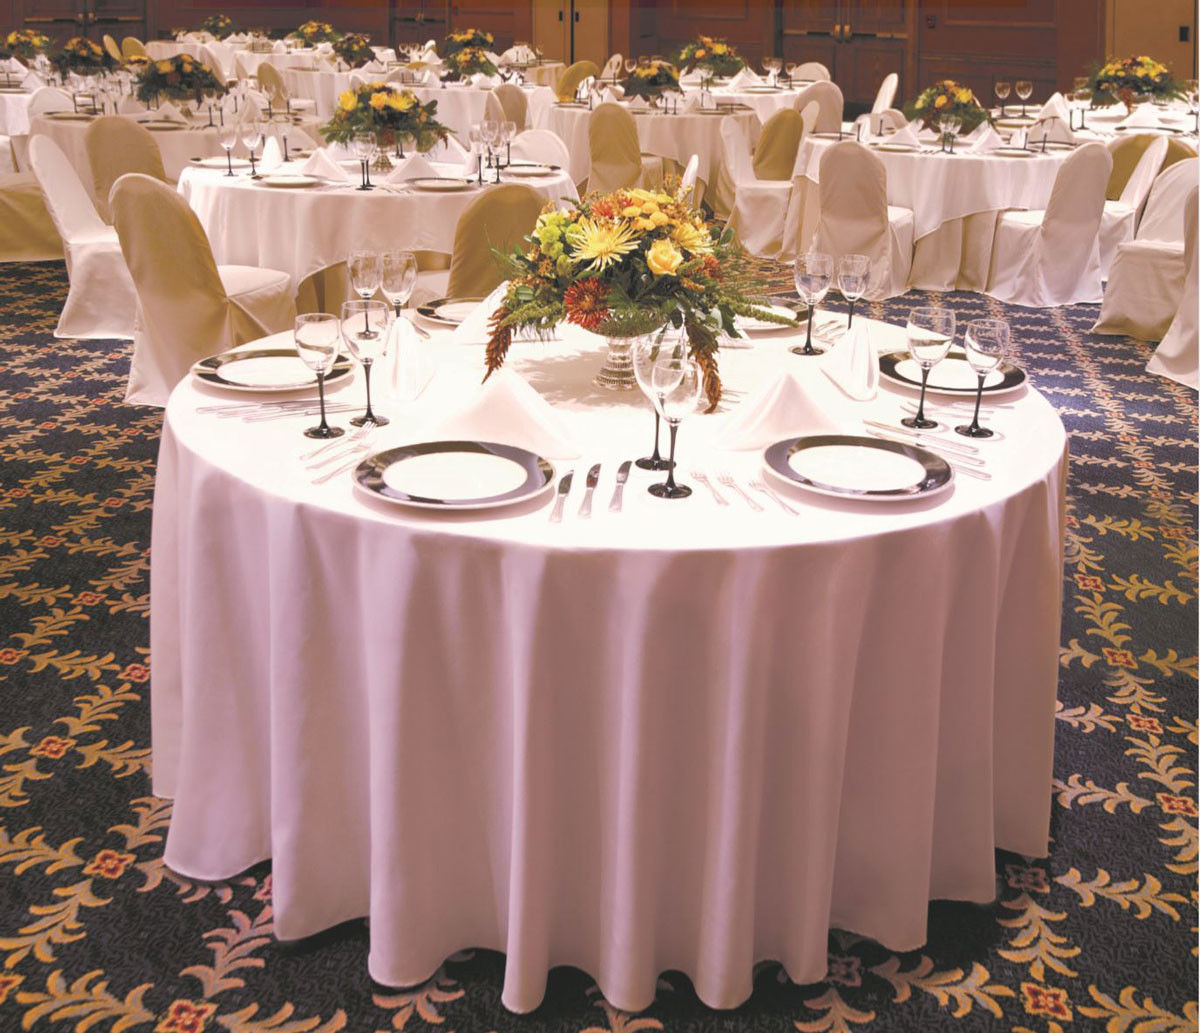 What is the material of the 132 inch round tablecloth from Milliken Horizon?